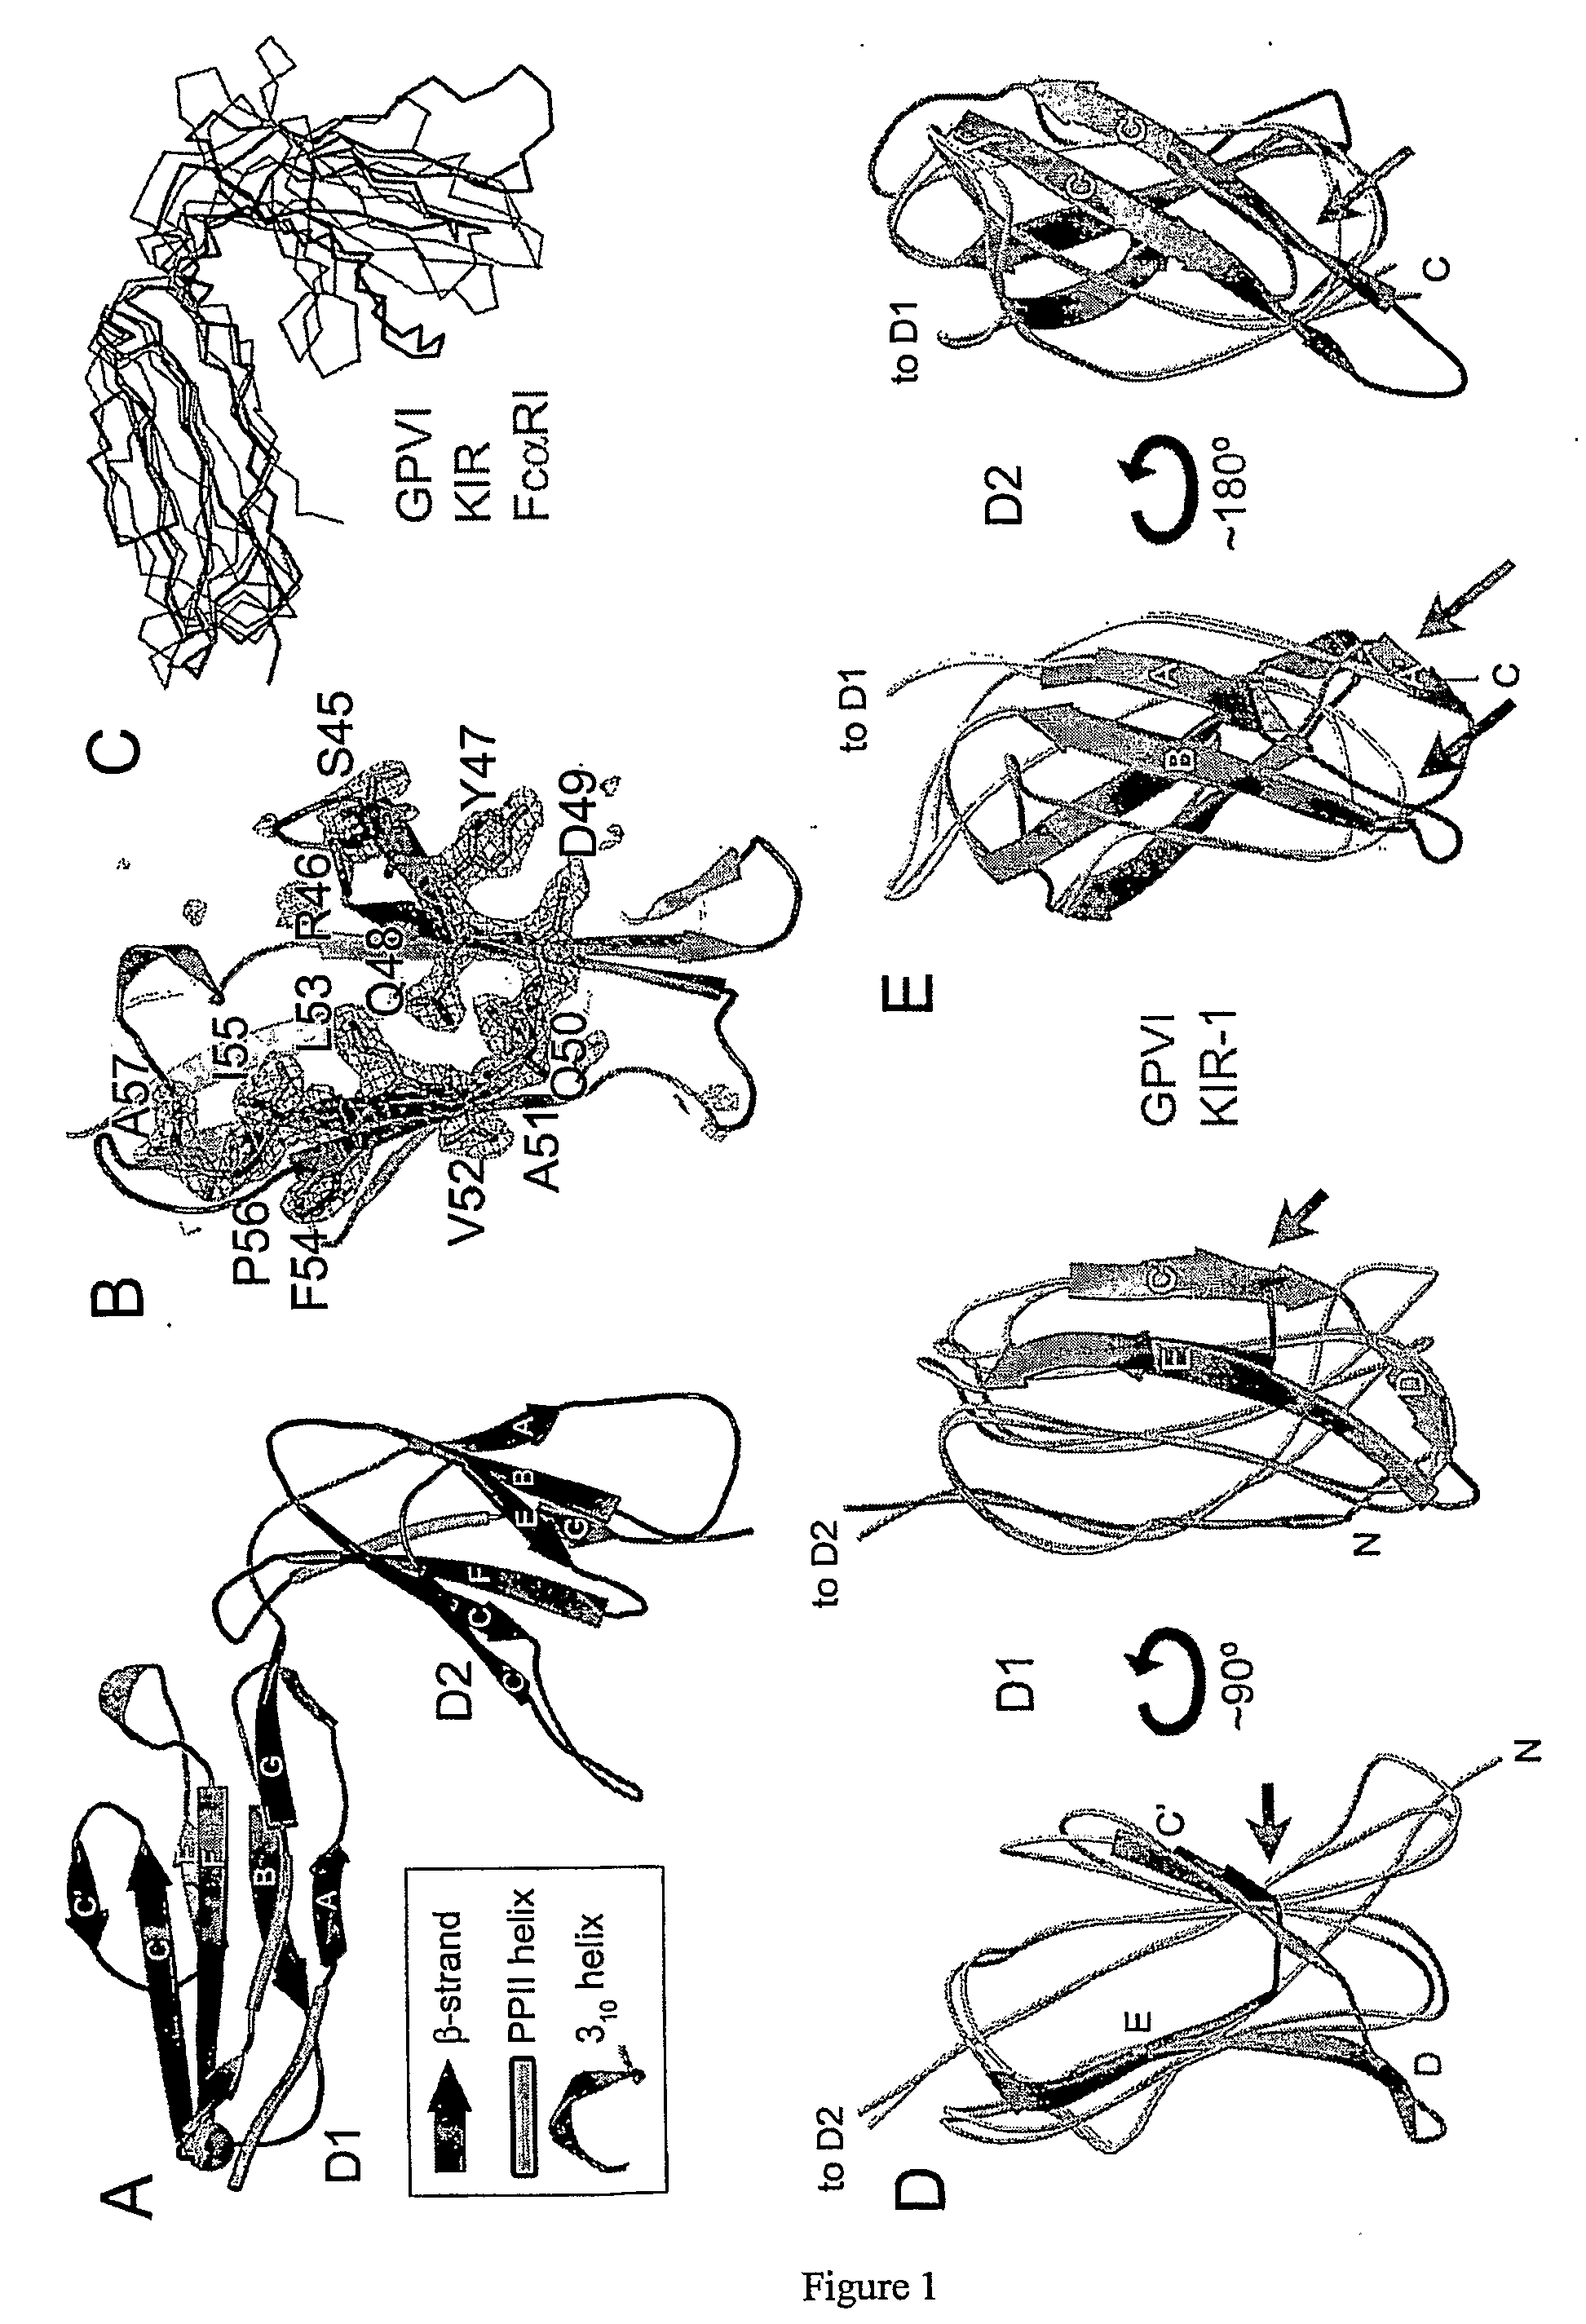 Crystal structure of human gpvi and applications thereof